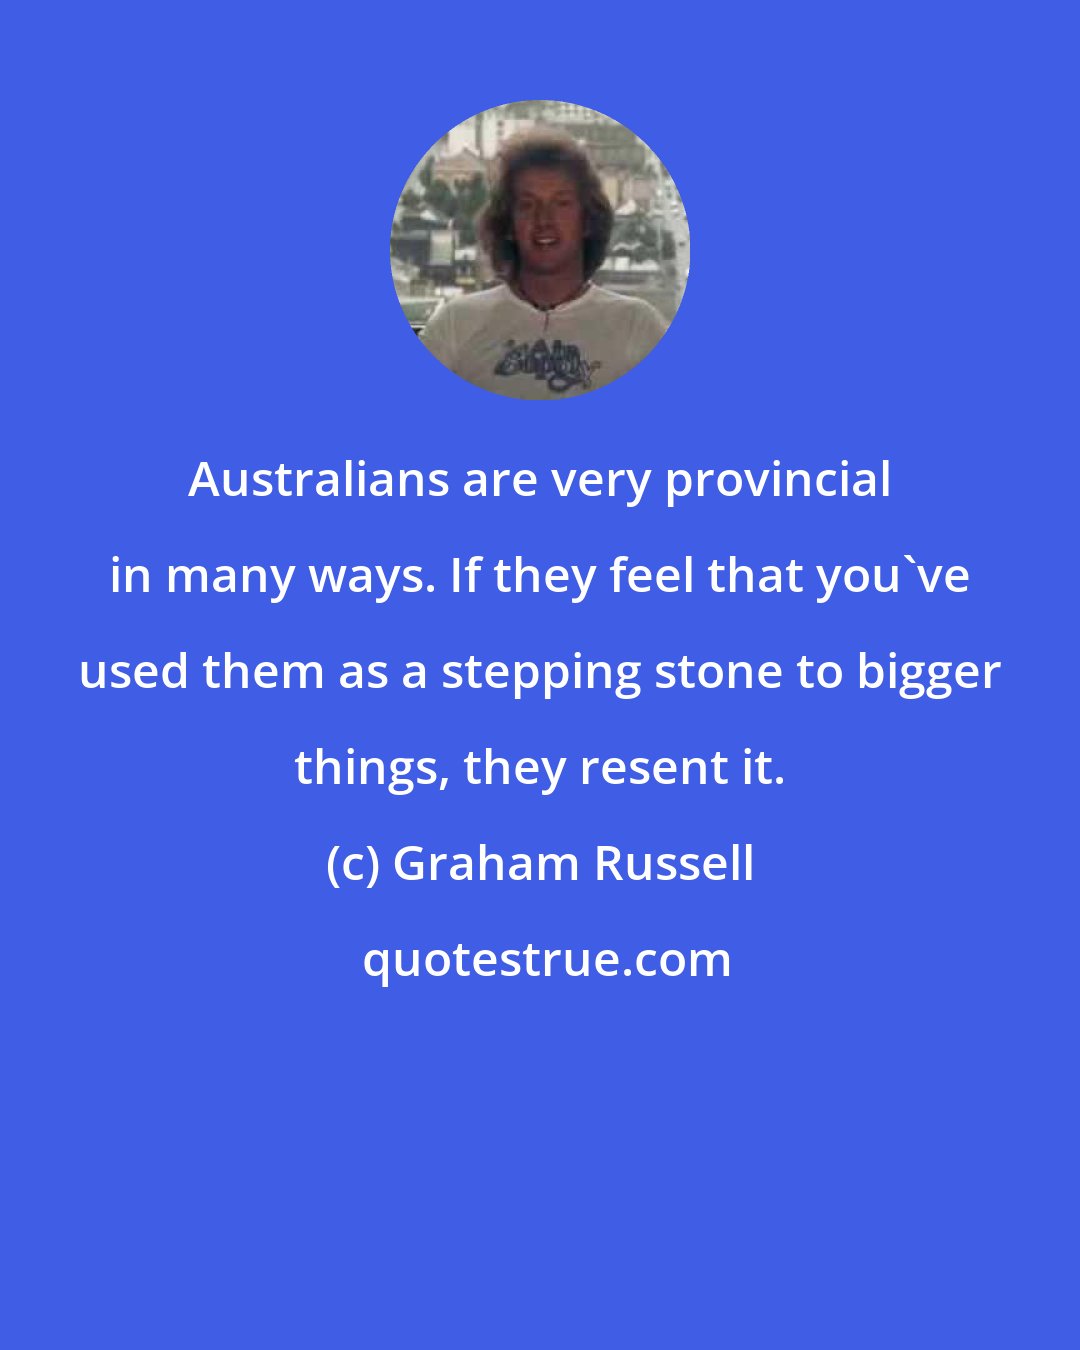 Graham Russell: Australians are very provincial in many ways. If they feel that you've used them as a stepping stone to bigger things, they resent it.